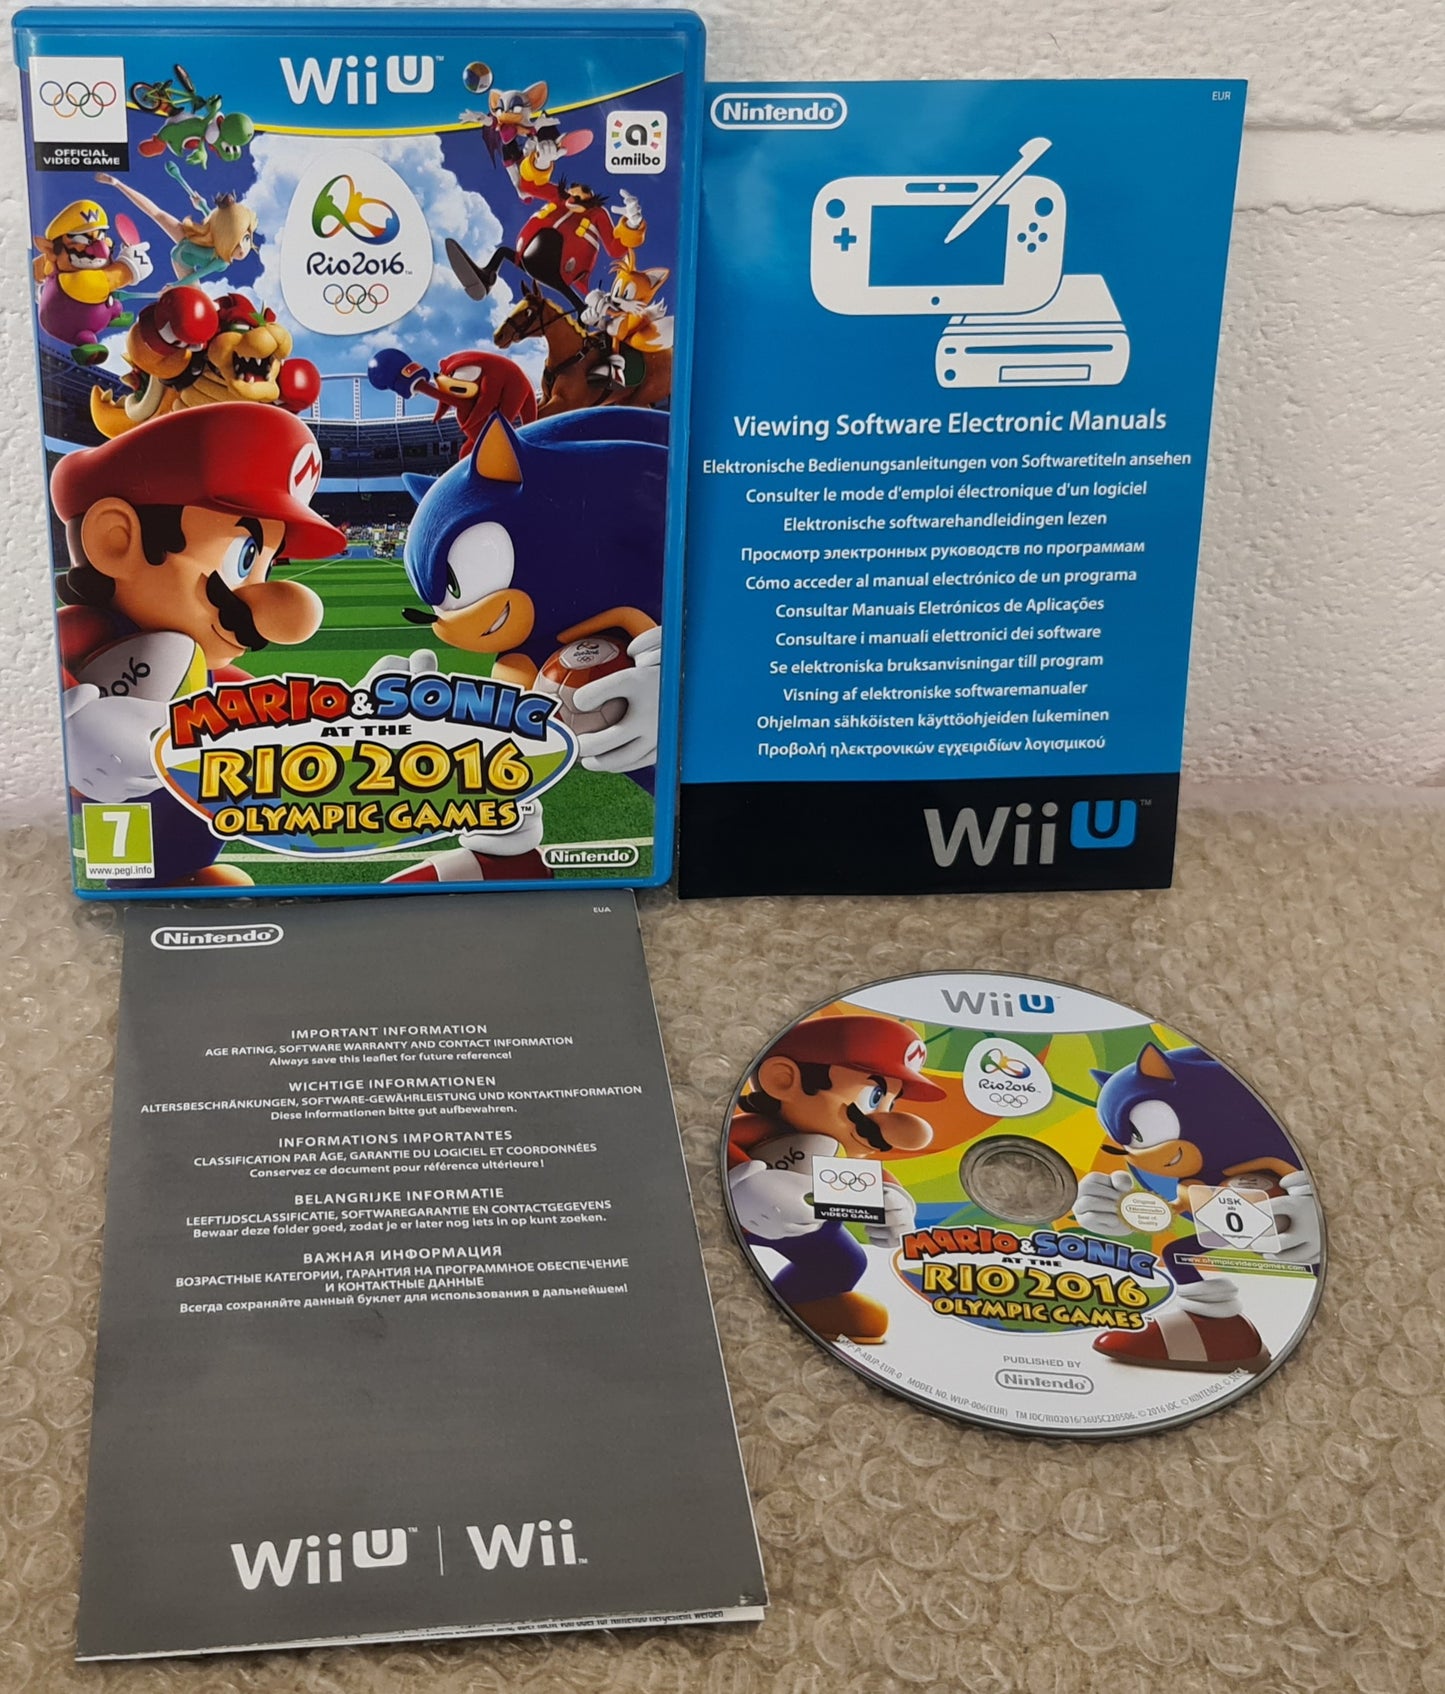 Mario & Sonic at the Rio 2016 Olympic Games Nintendo Wii U Game